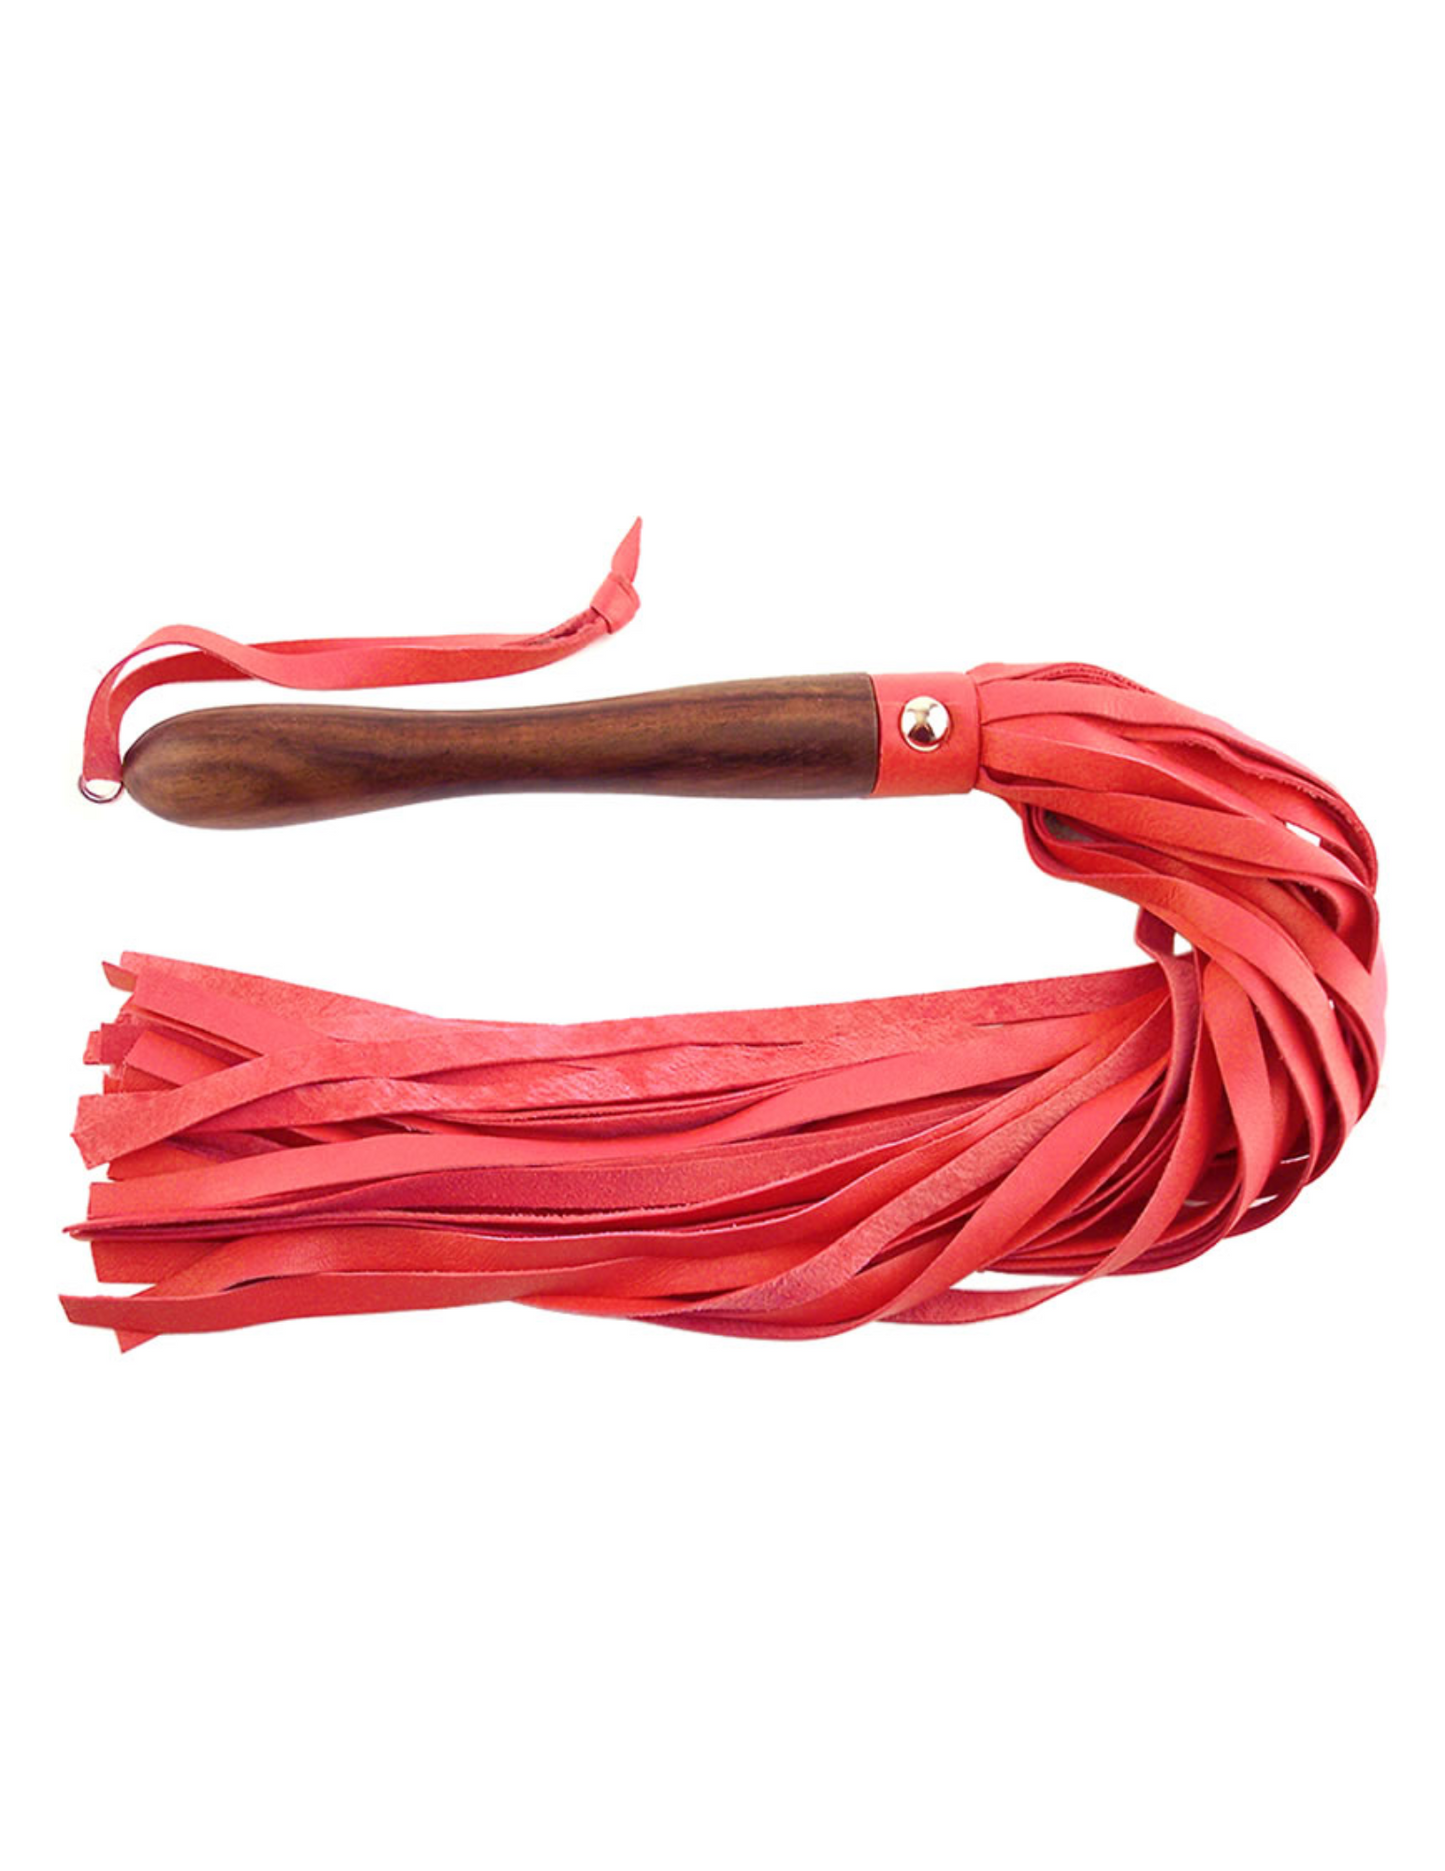 Photo of the Wooden Handled Leather Flogger from Rouge (red) shows its sturdy handle and soft, flexible, leather tresses.